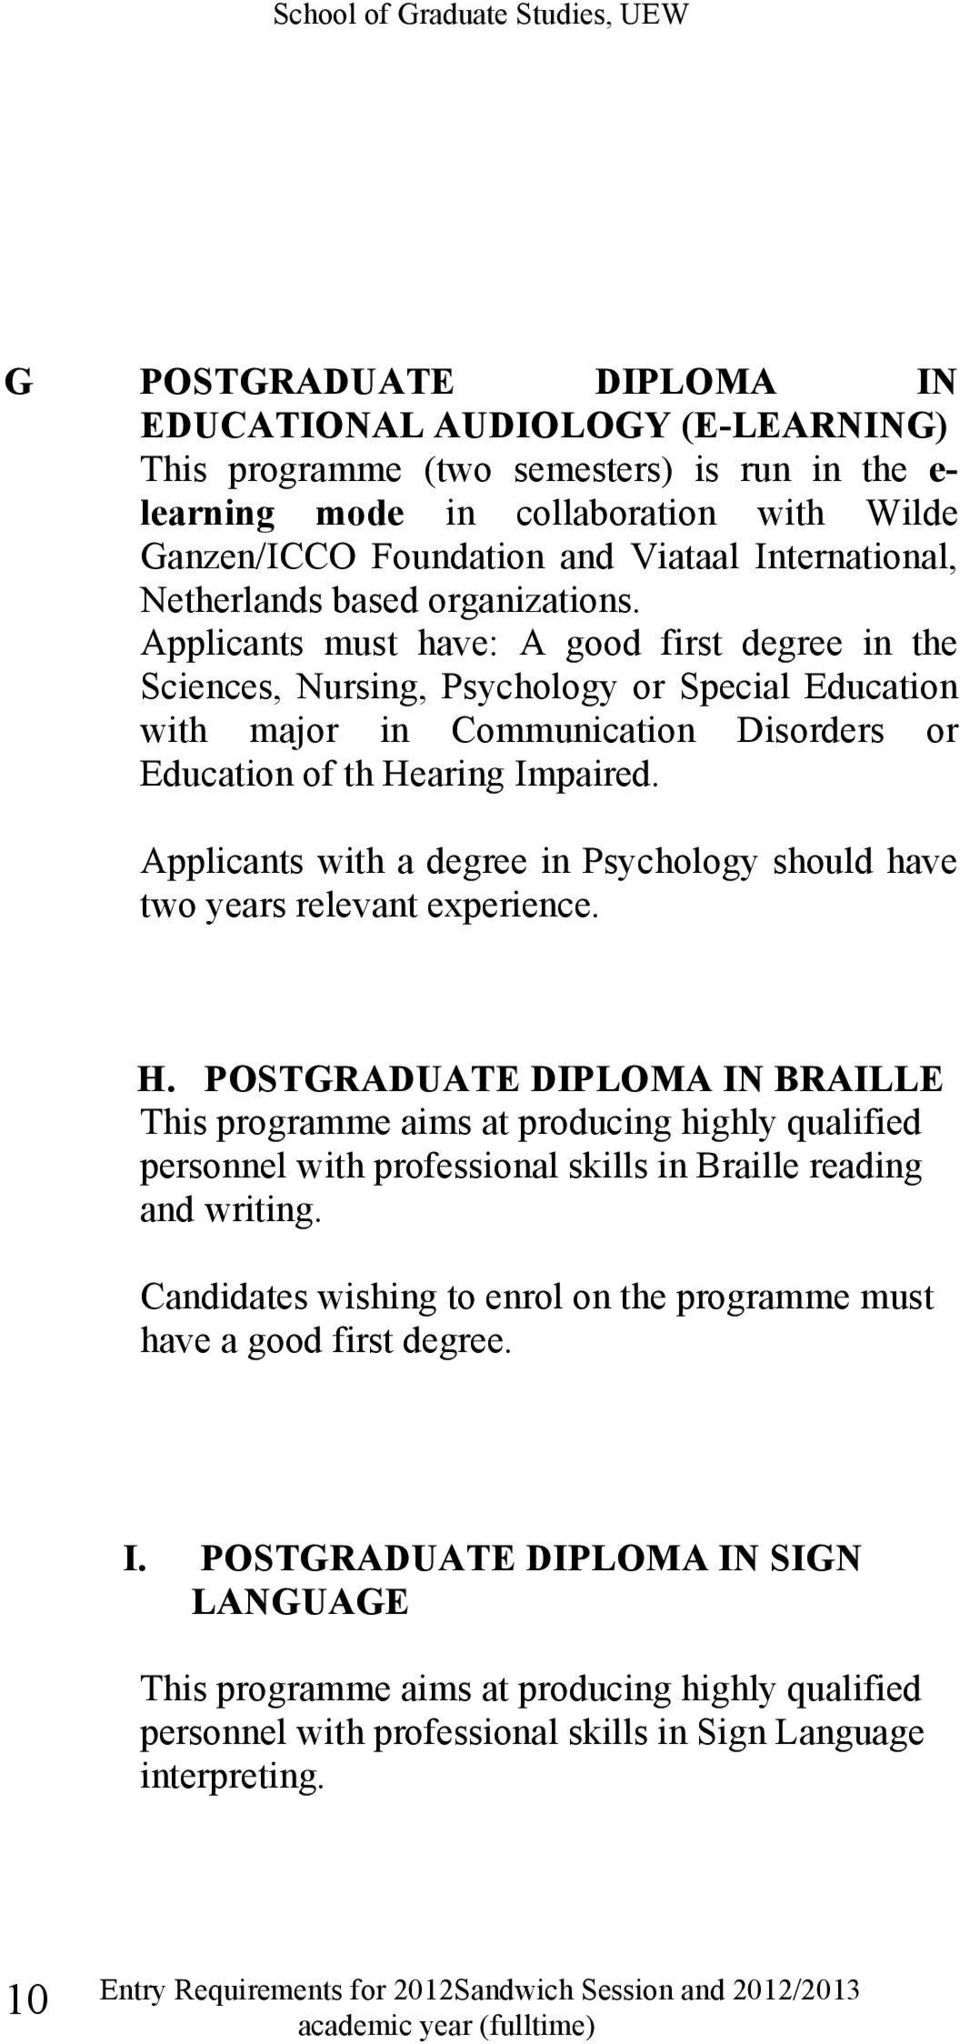 Applicants must have: A good first degree in the Sciences, Nursing, Psychology or Special Education with major in Communication Disorders or Education of th Hearing Impaired.